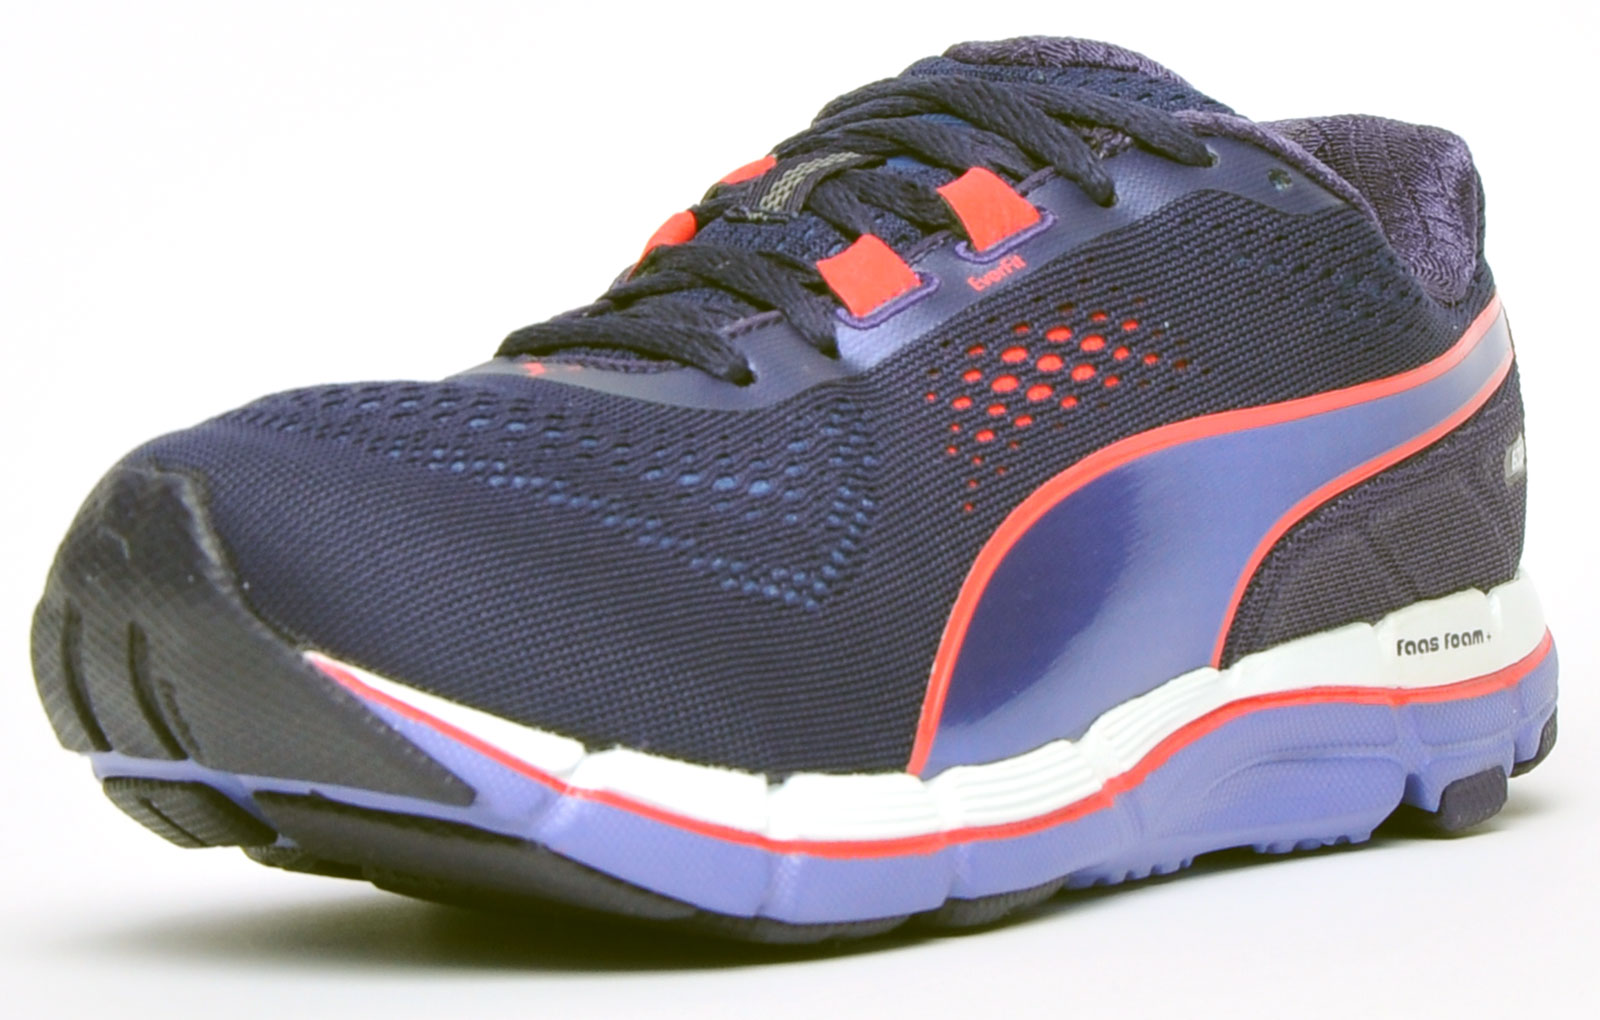 Puma Womens Faas 600 Running Shoes Lace Up Padded Fitness Sports eBay